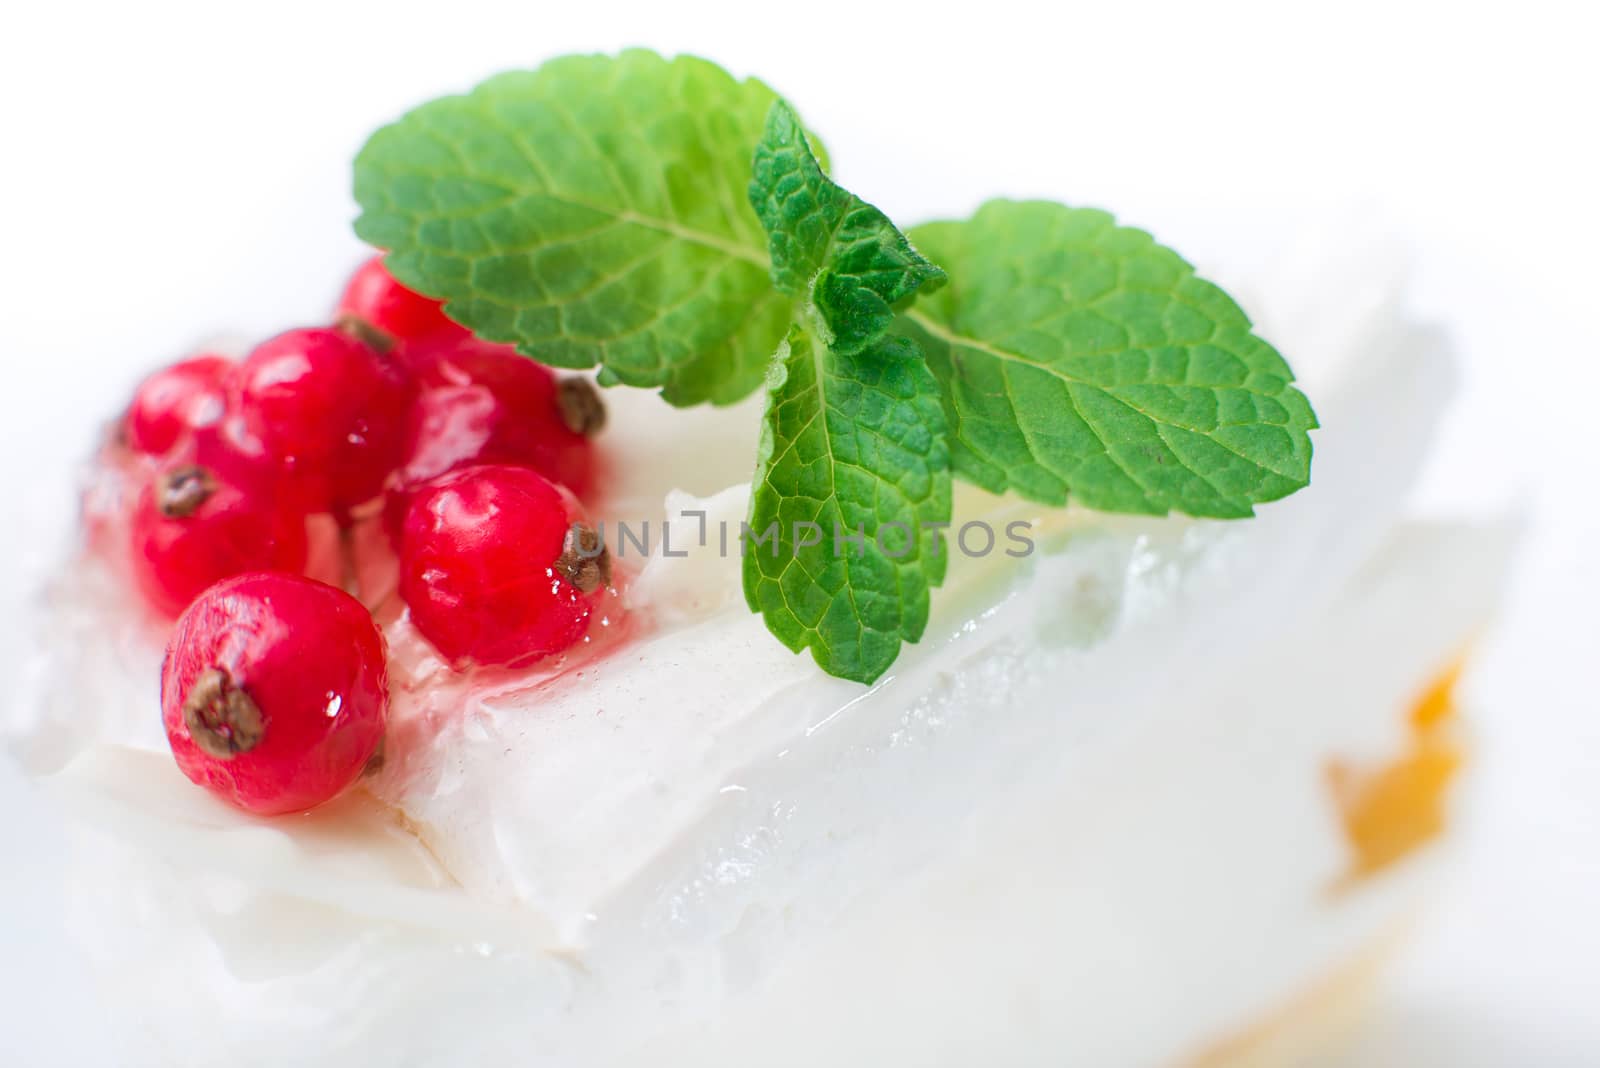 cheesecake with berries red currant and mint leaves